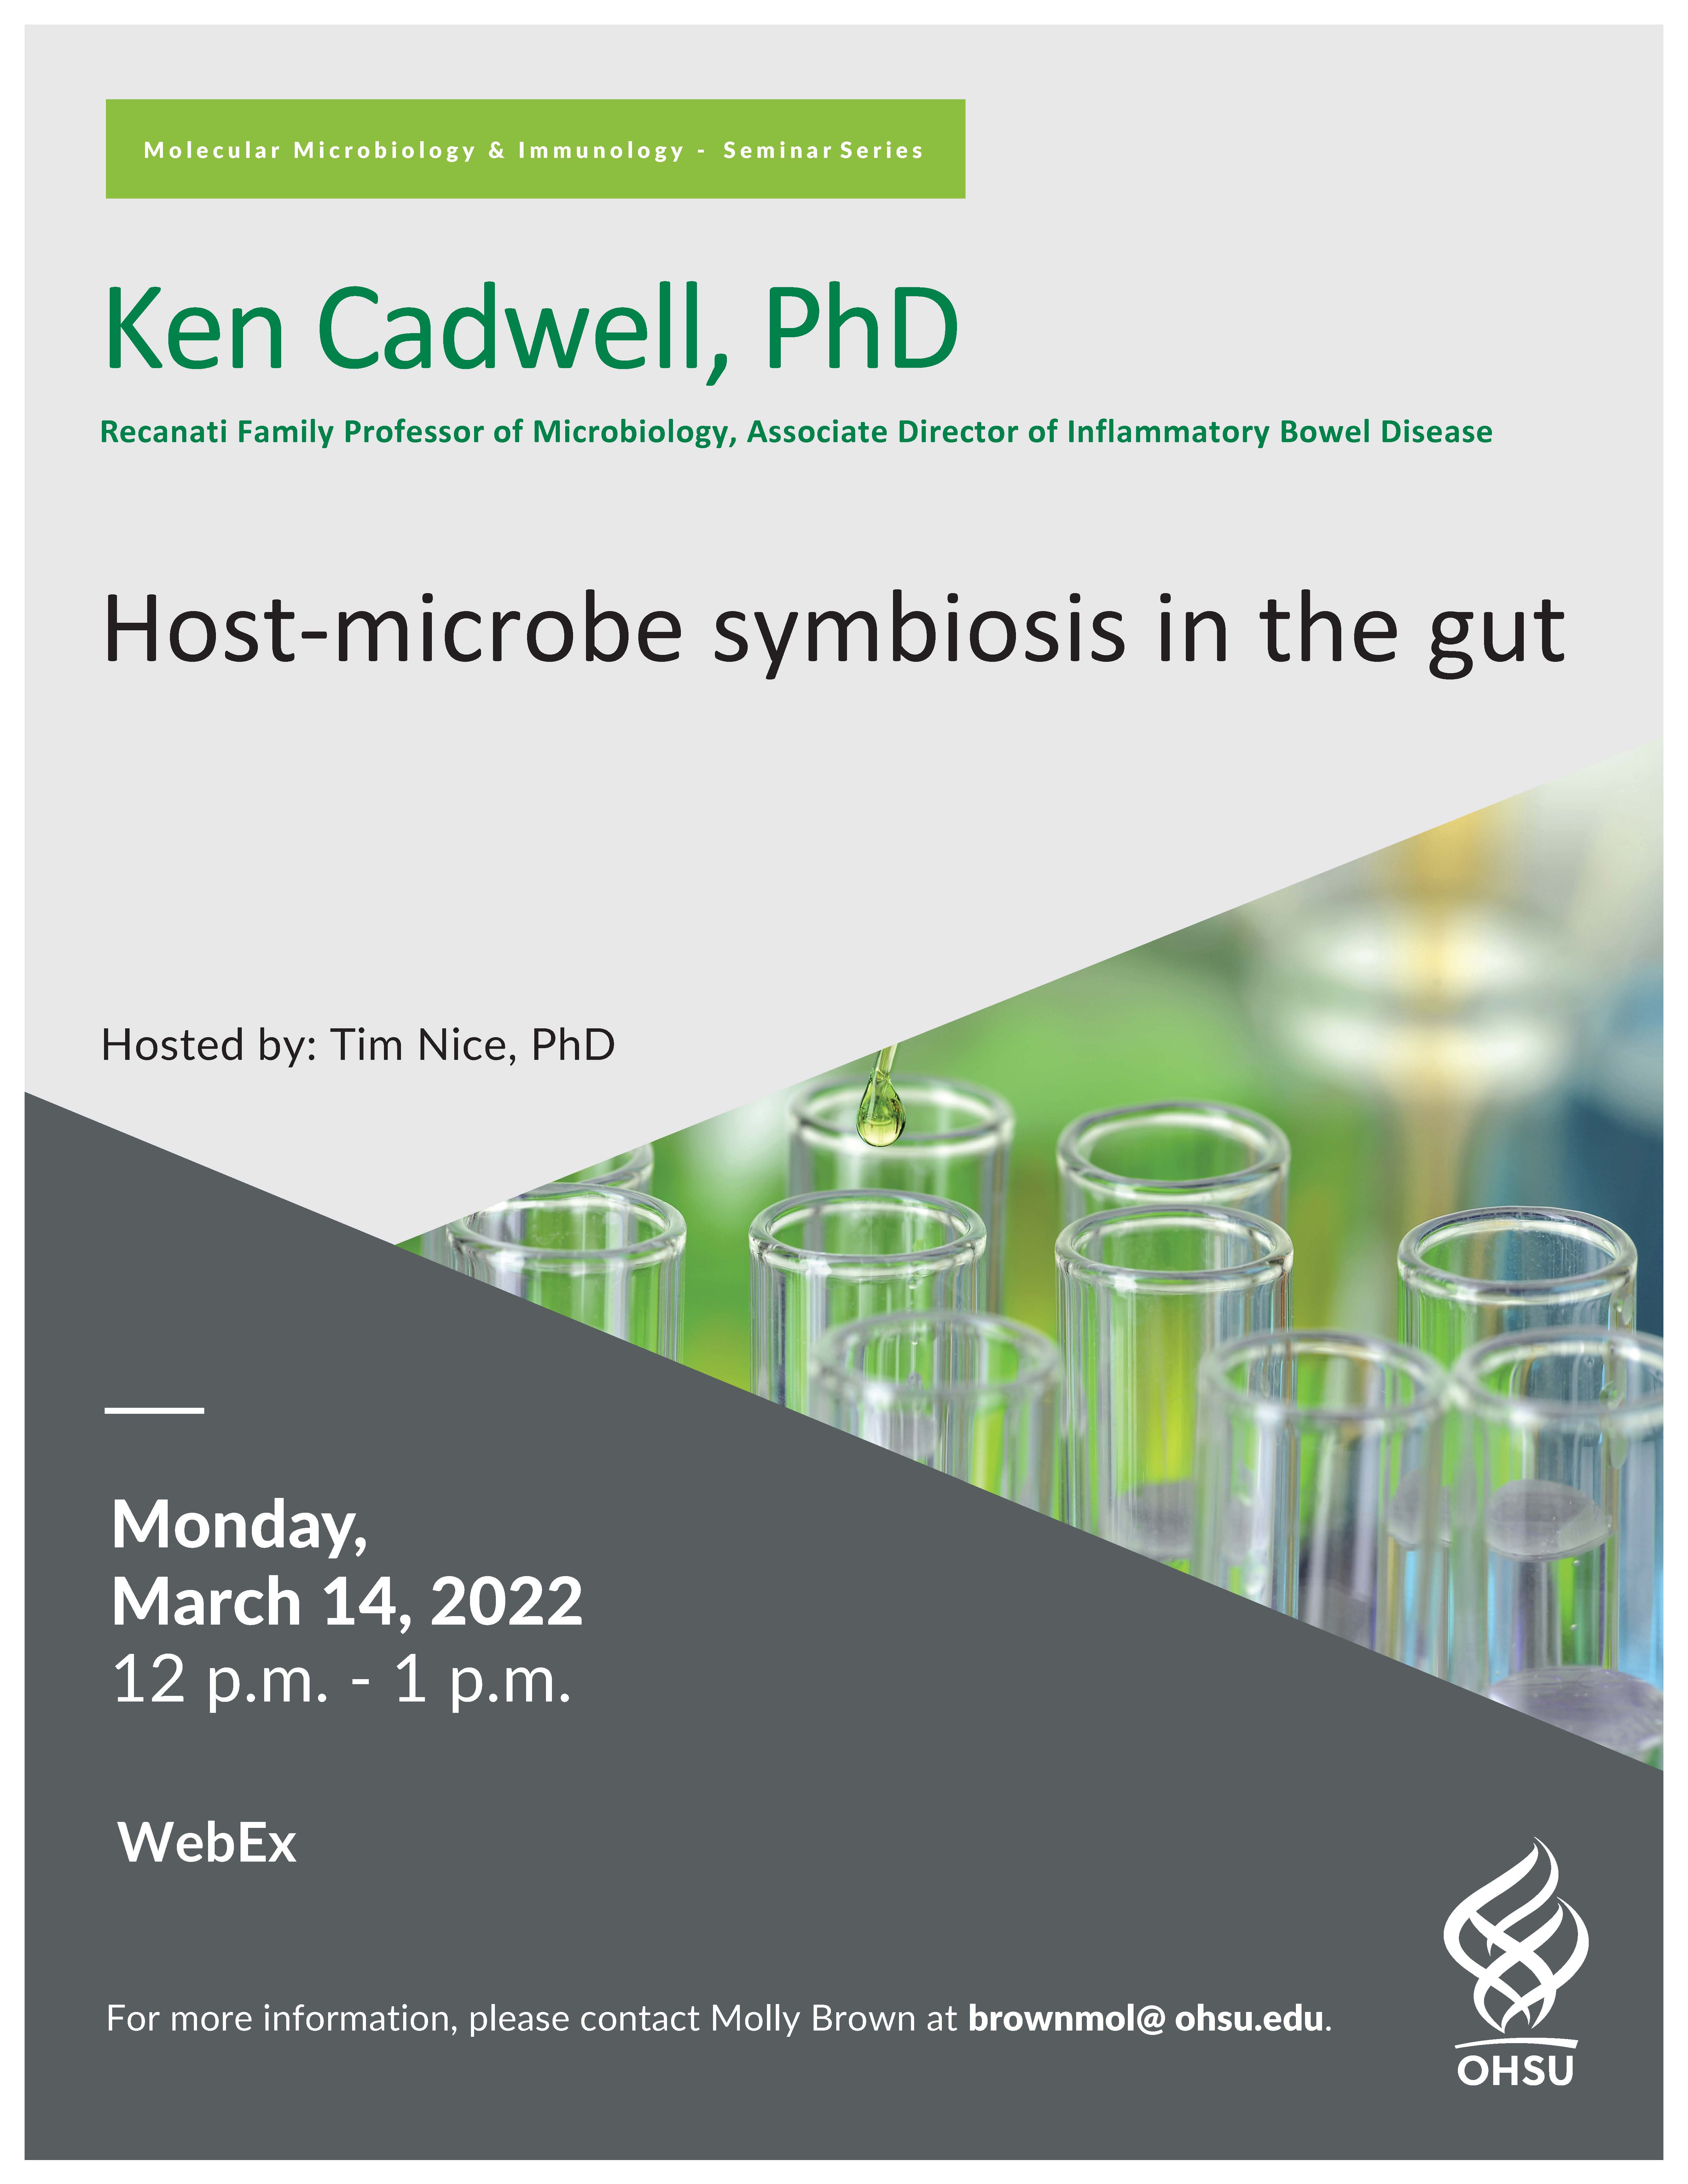 Host-microbe symbiosis in the gut